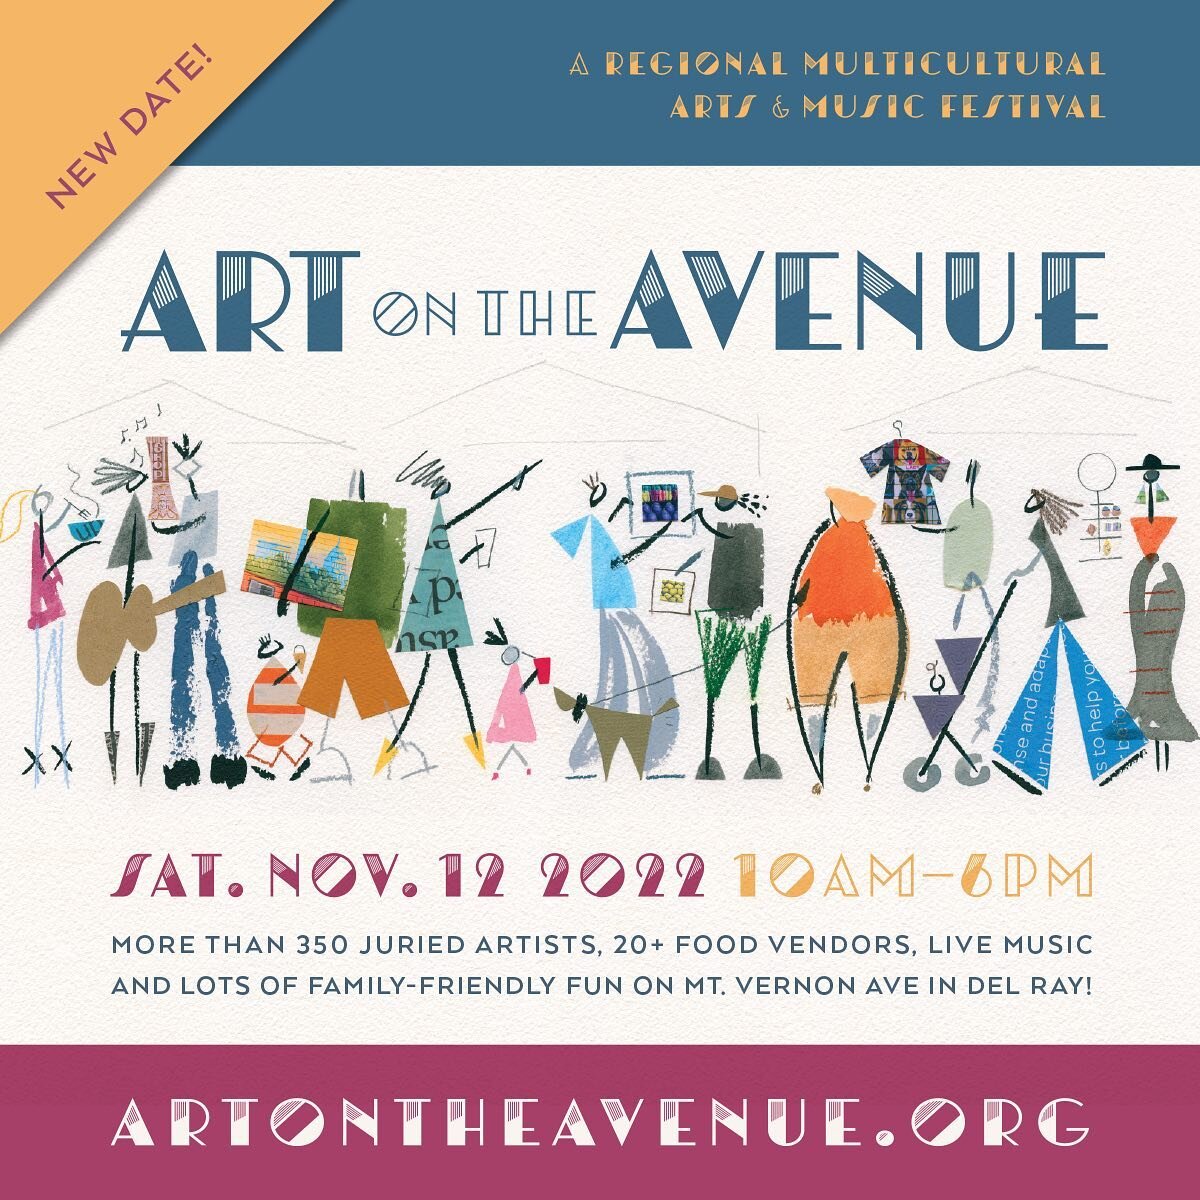 Ian caused this event to move to November 12. Hope to see you there! @artontheavenuedelray